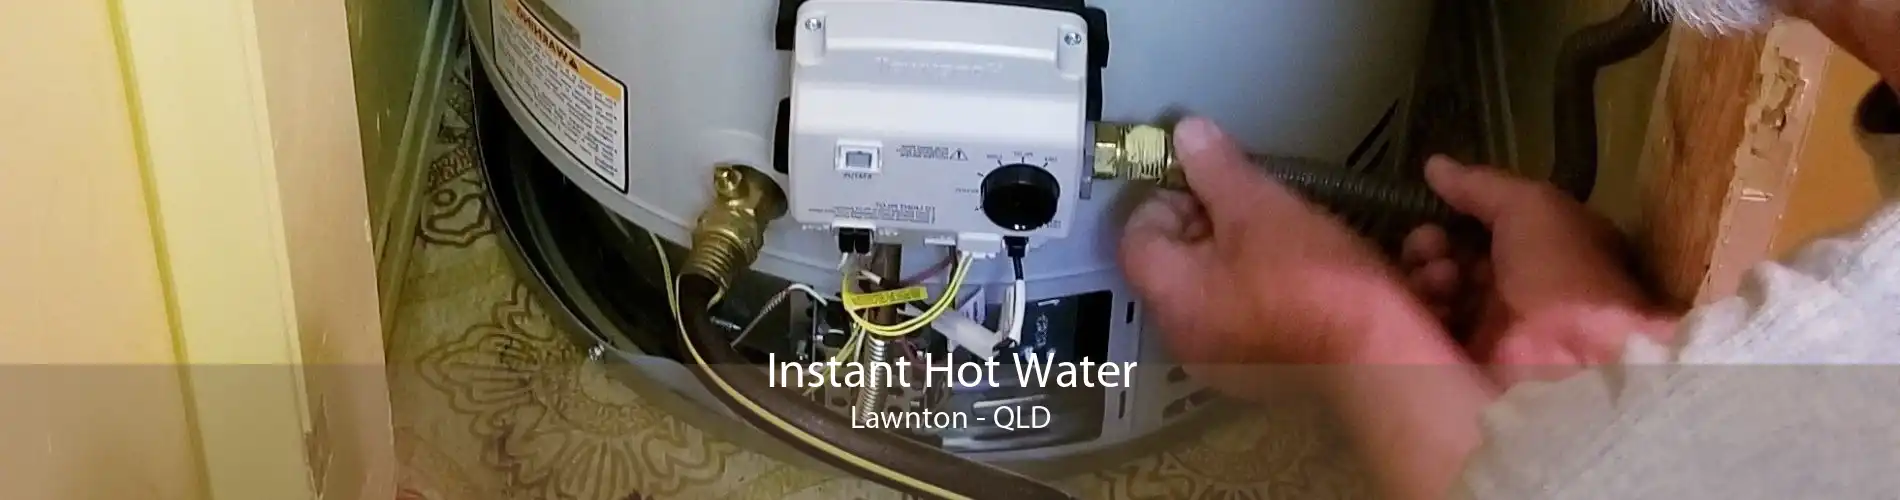 Instant Hot Water Lawnton - QLD